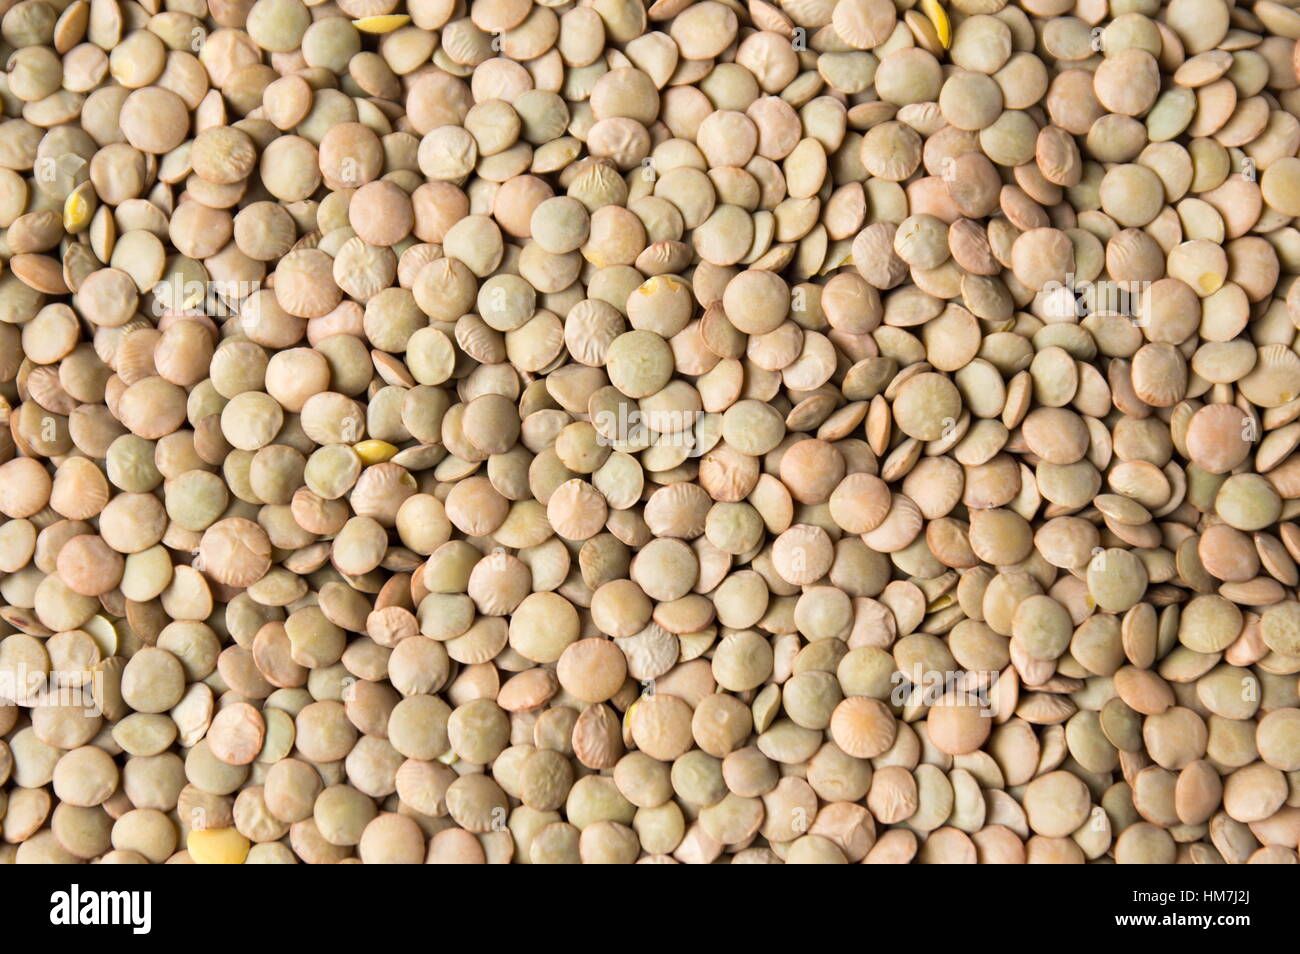 Bunch of raw lentil forming a background pattern Stock Photo